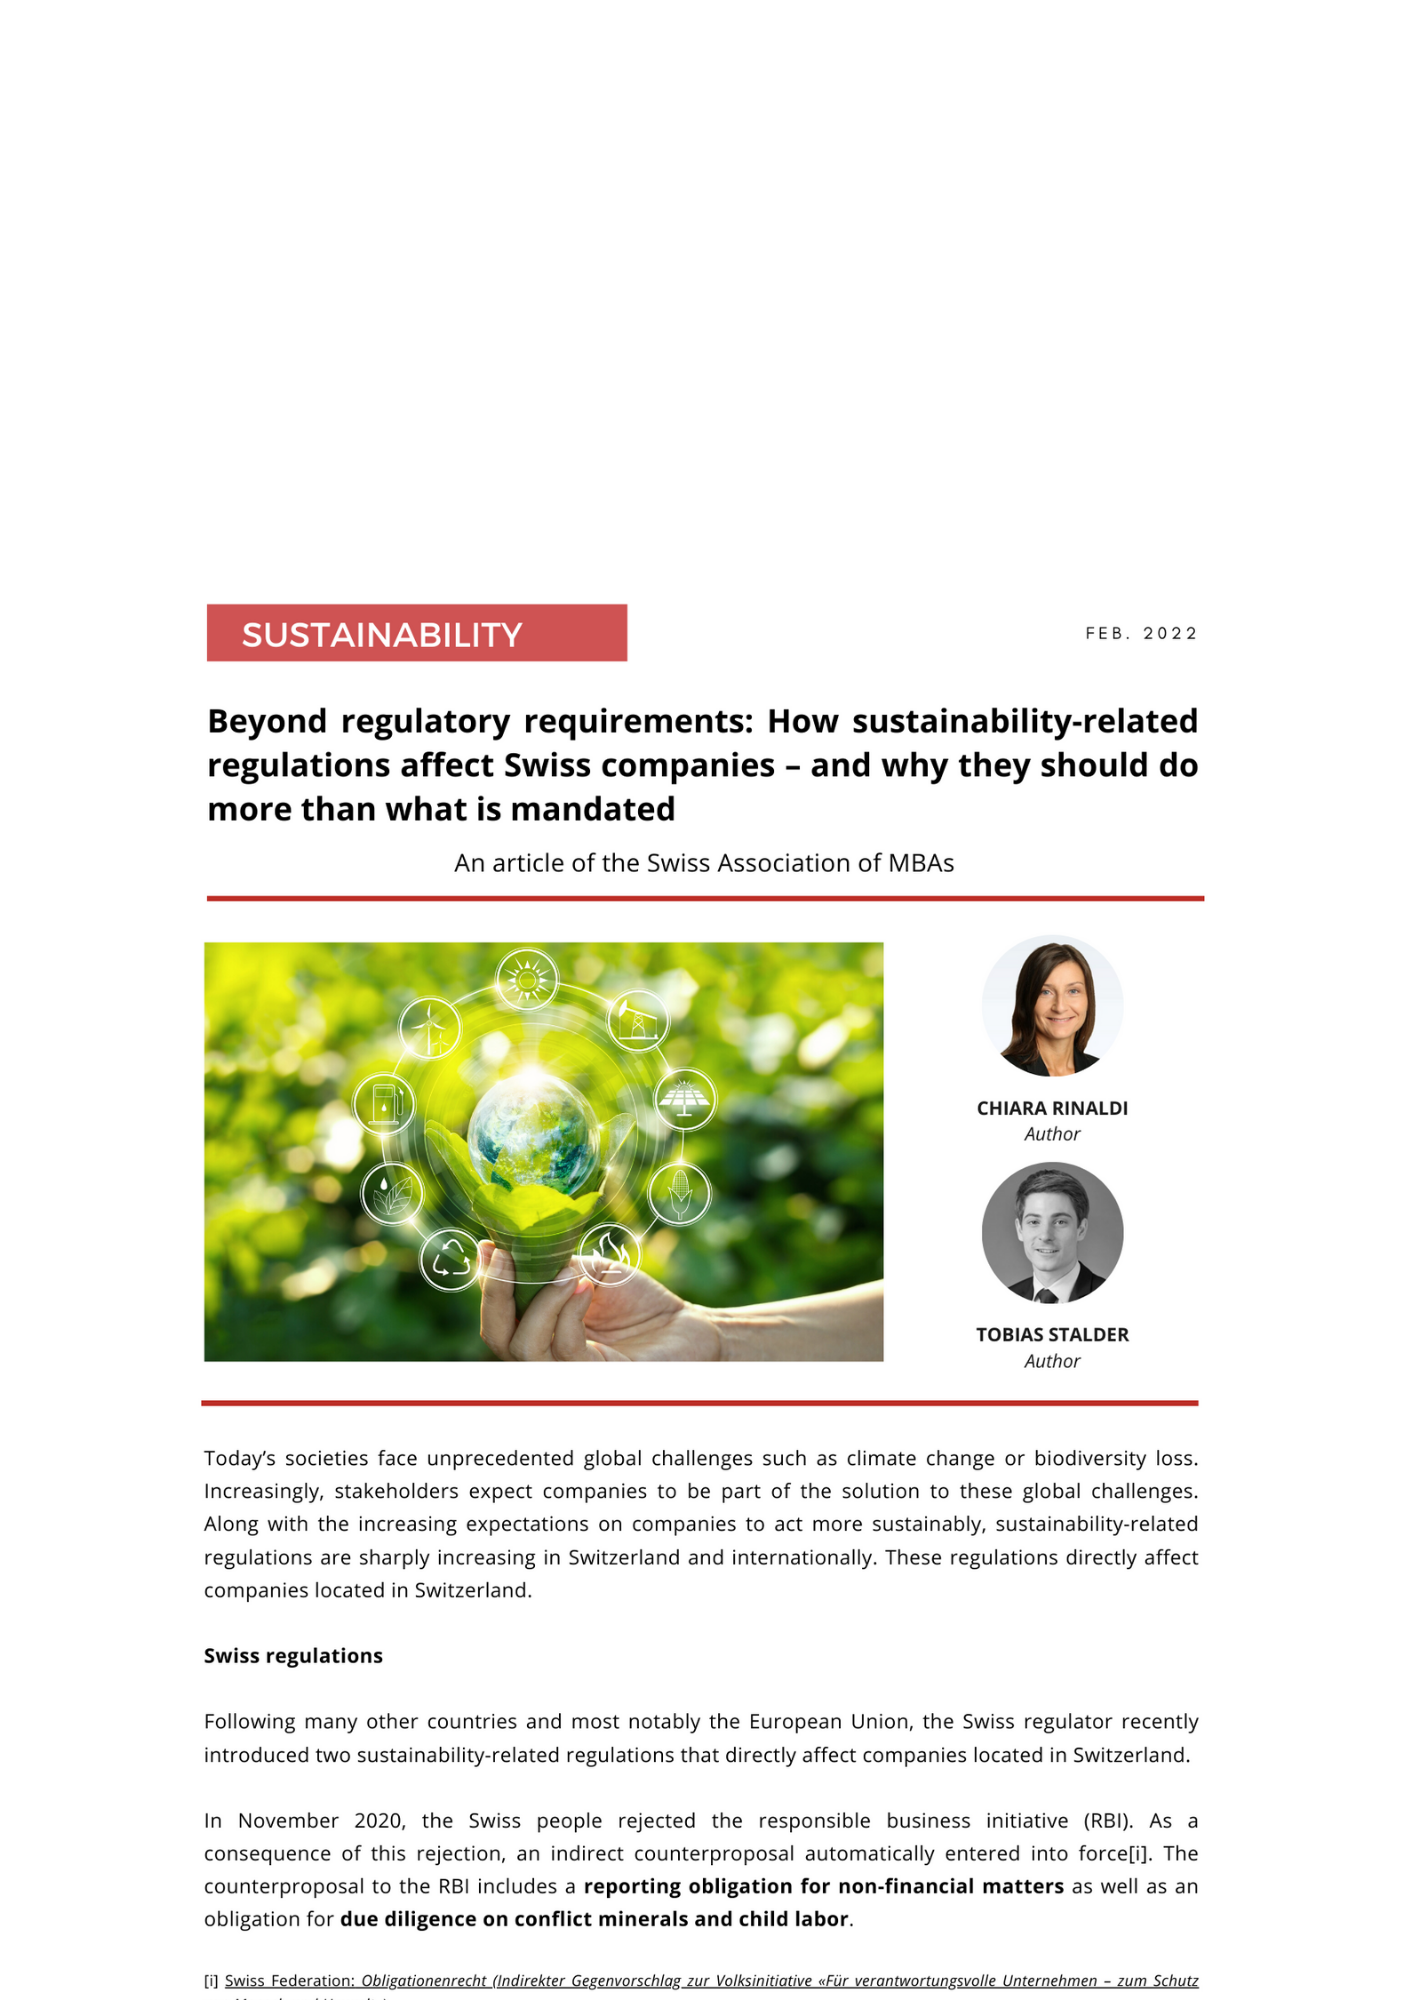 Beyond regulatory requirements: How sustainability-related regulations affect Swiss companies – and why they should do more than what is mandated